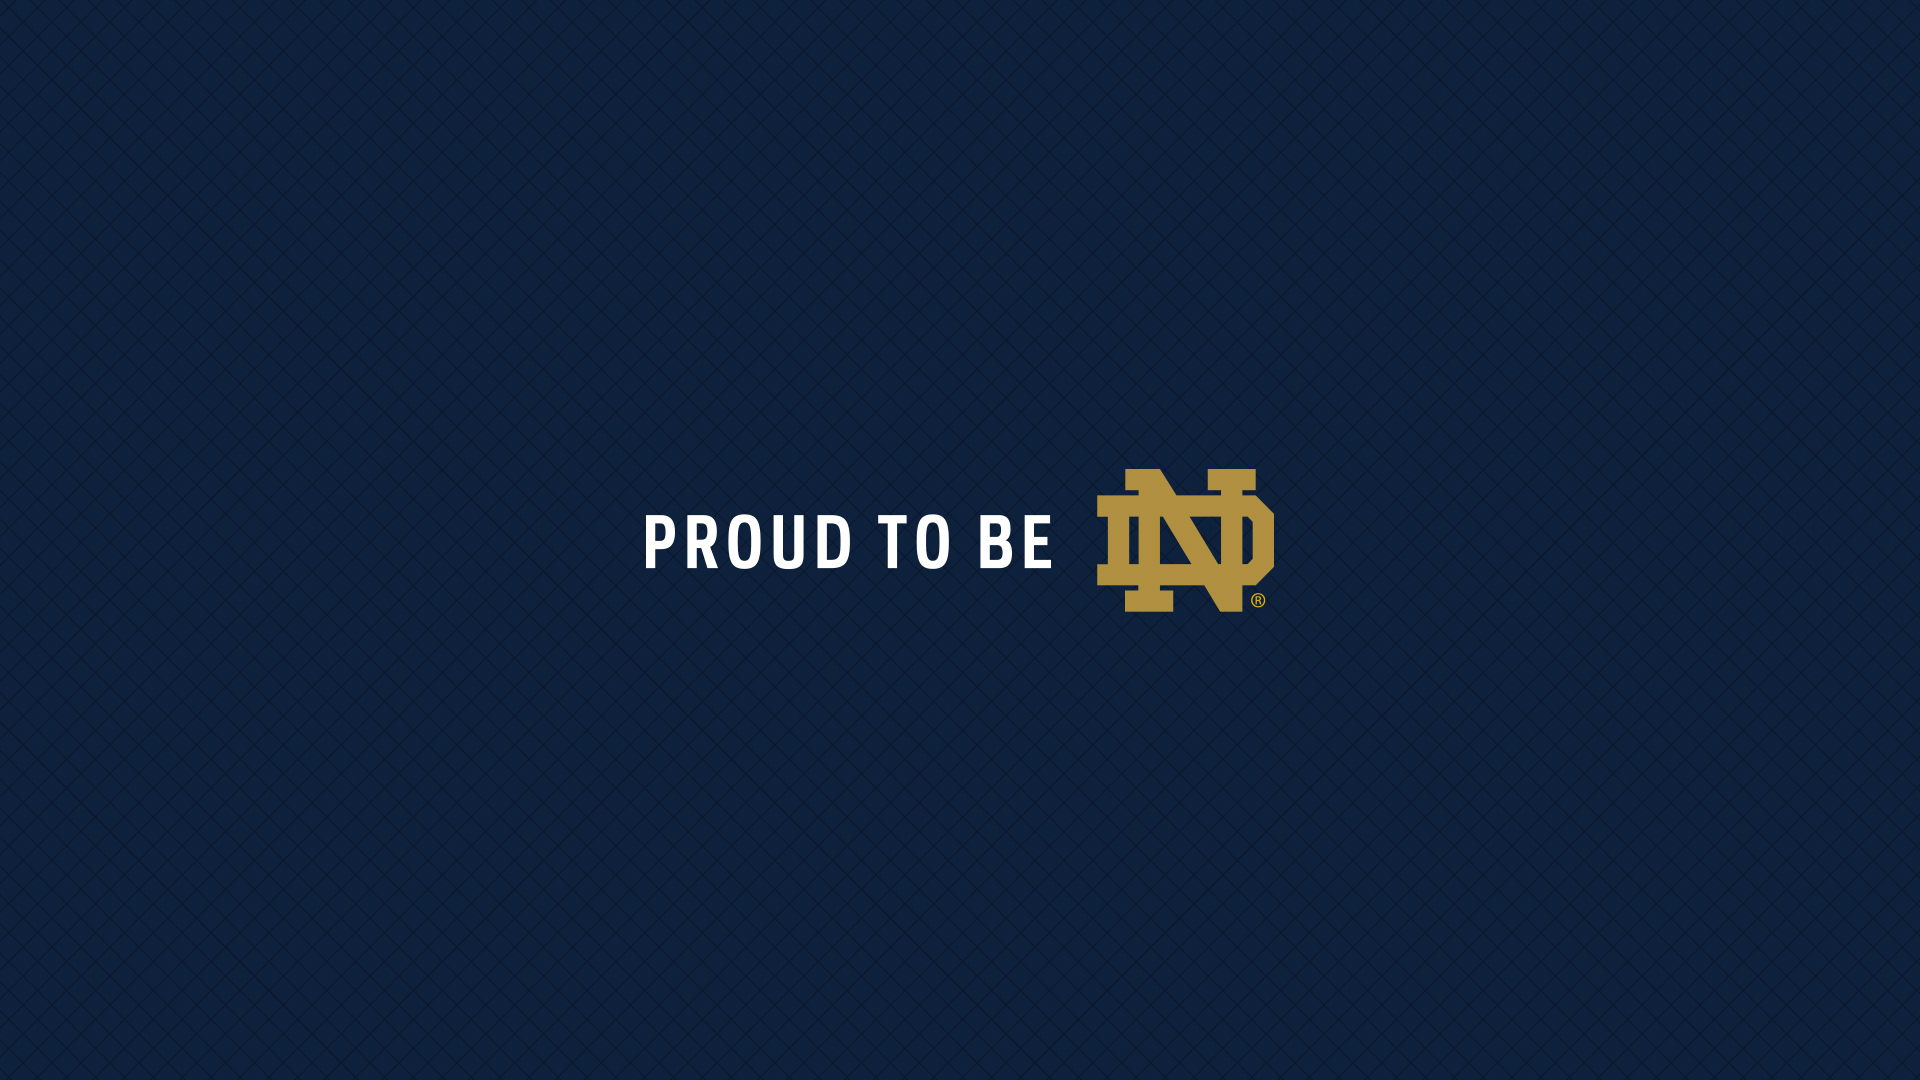 Of Notre Dame With Text Proud To Be Nd HD Wallpaper For